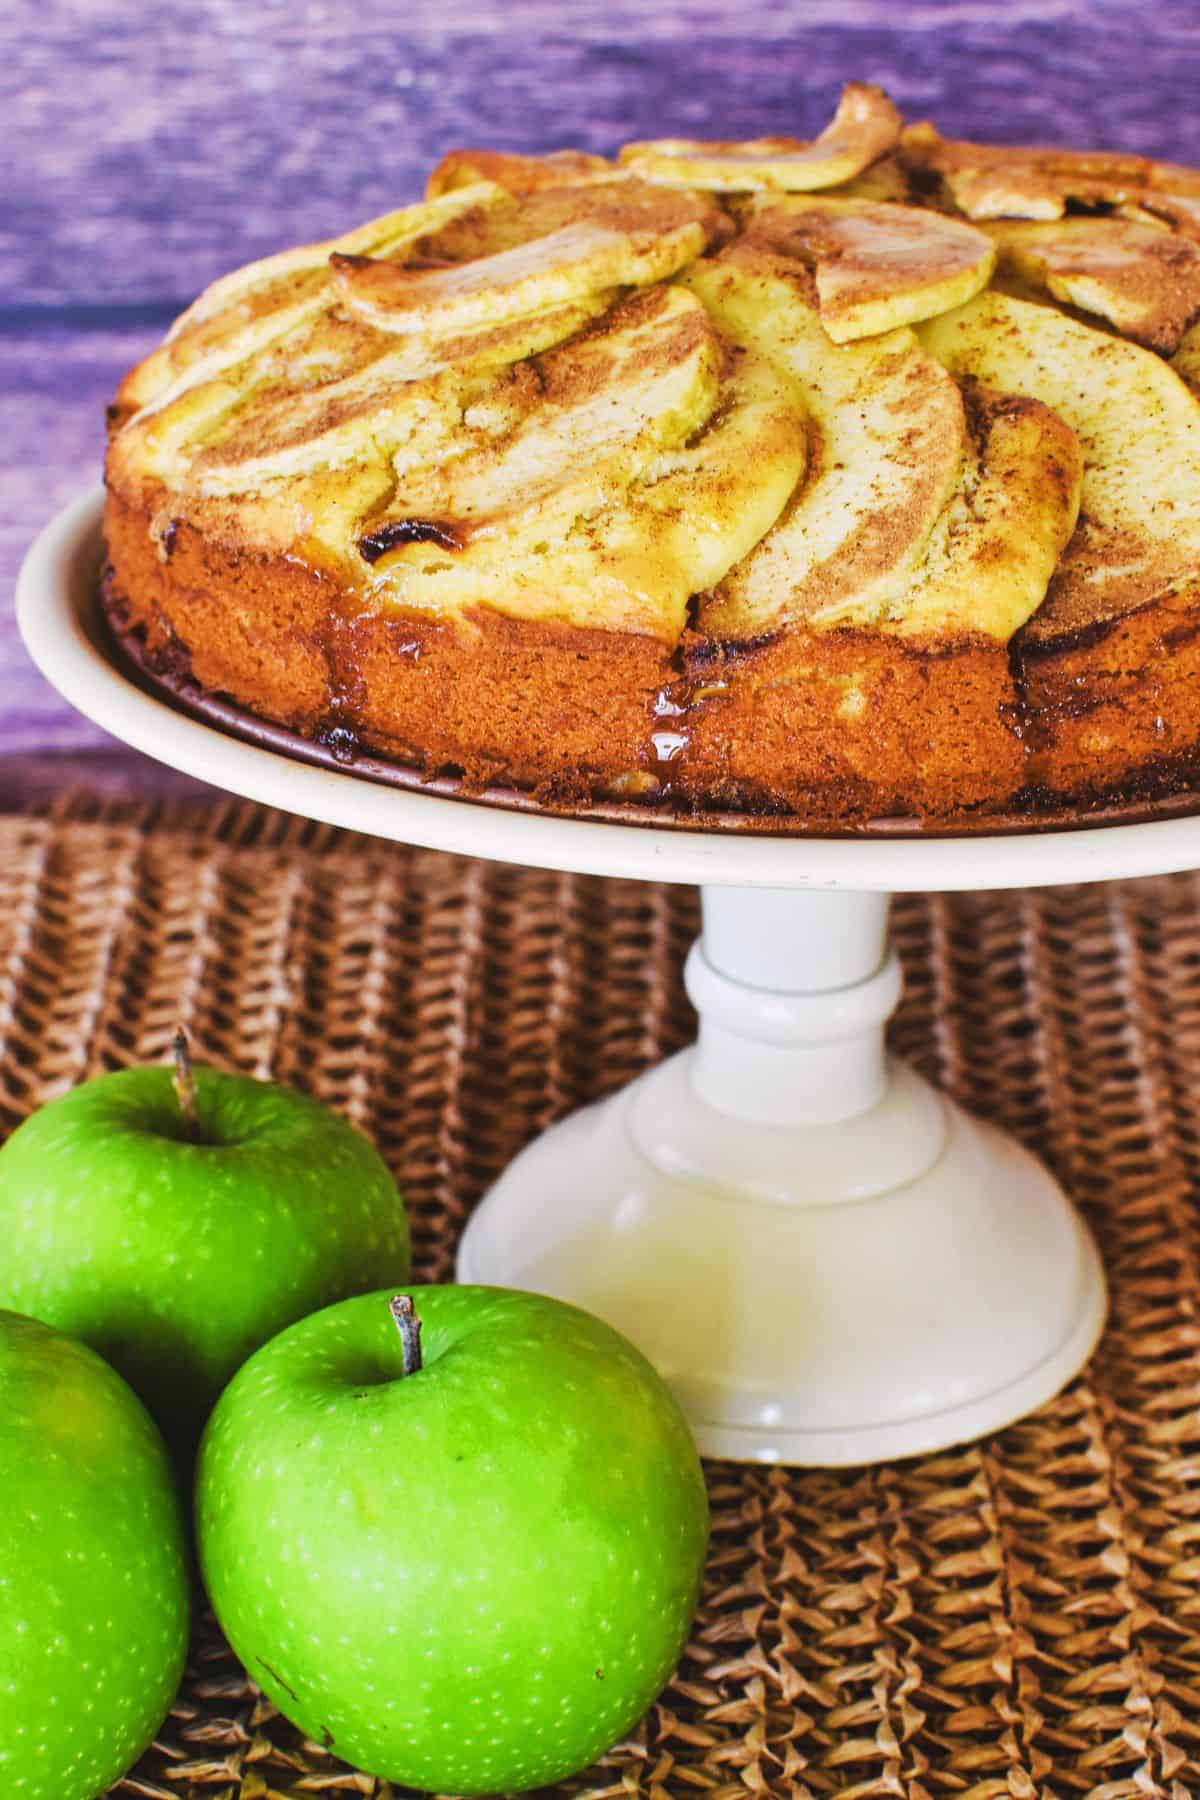 apple tea cake on cake stand with green apples in foreground.